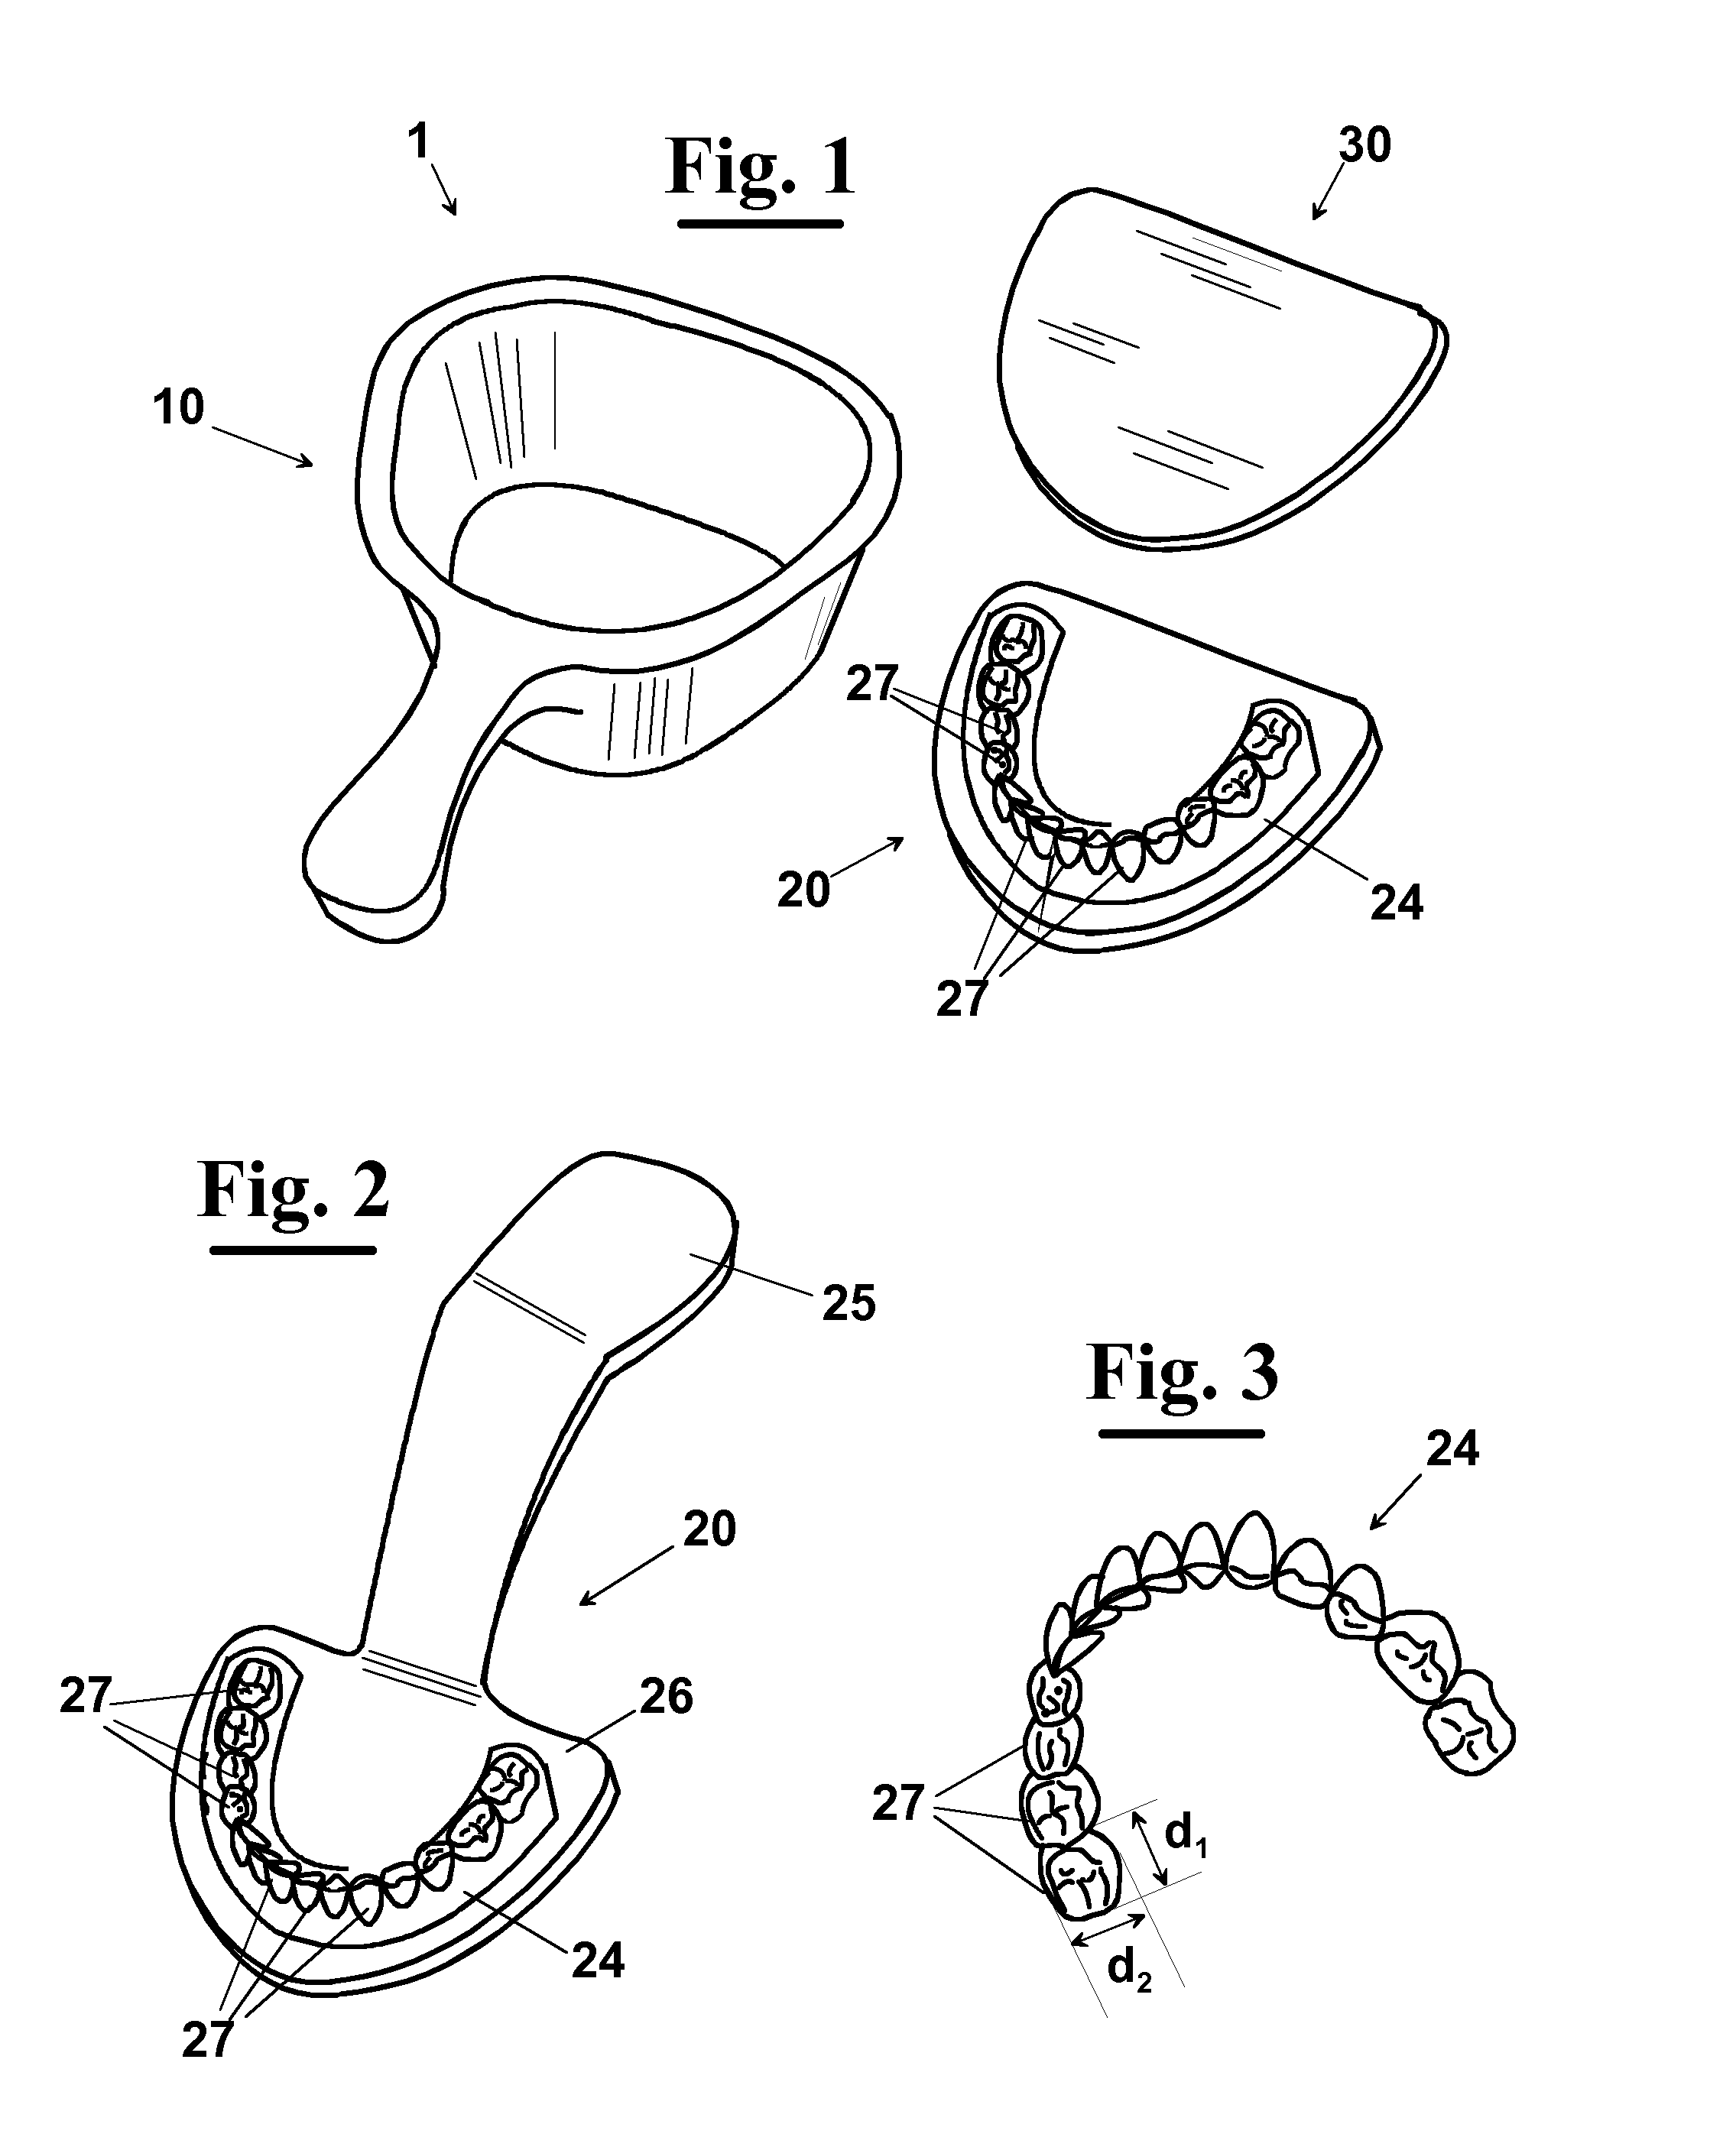 Method for making an impression tray for dental use